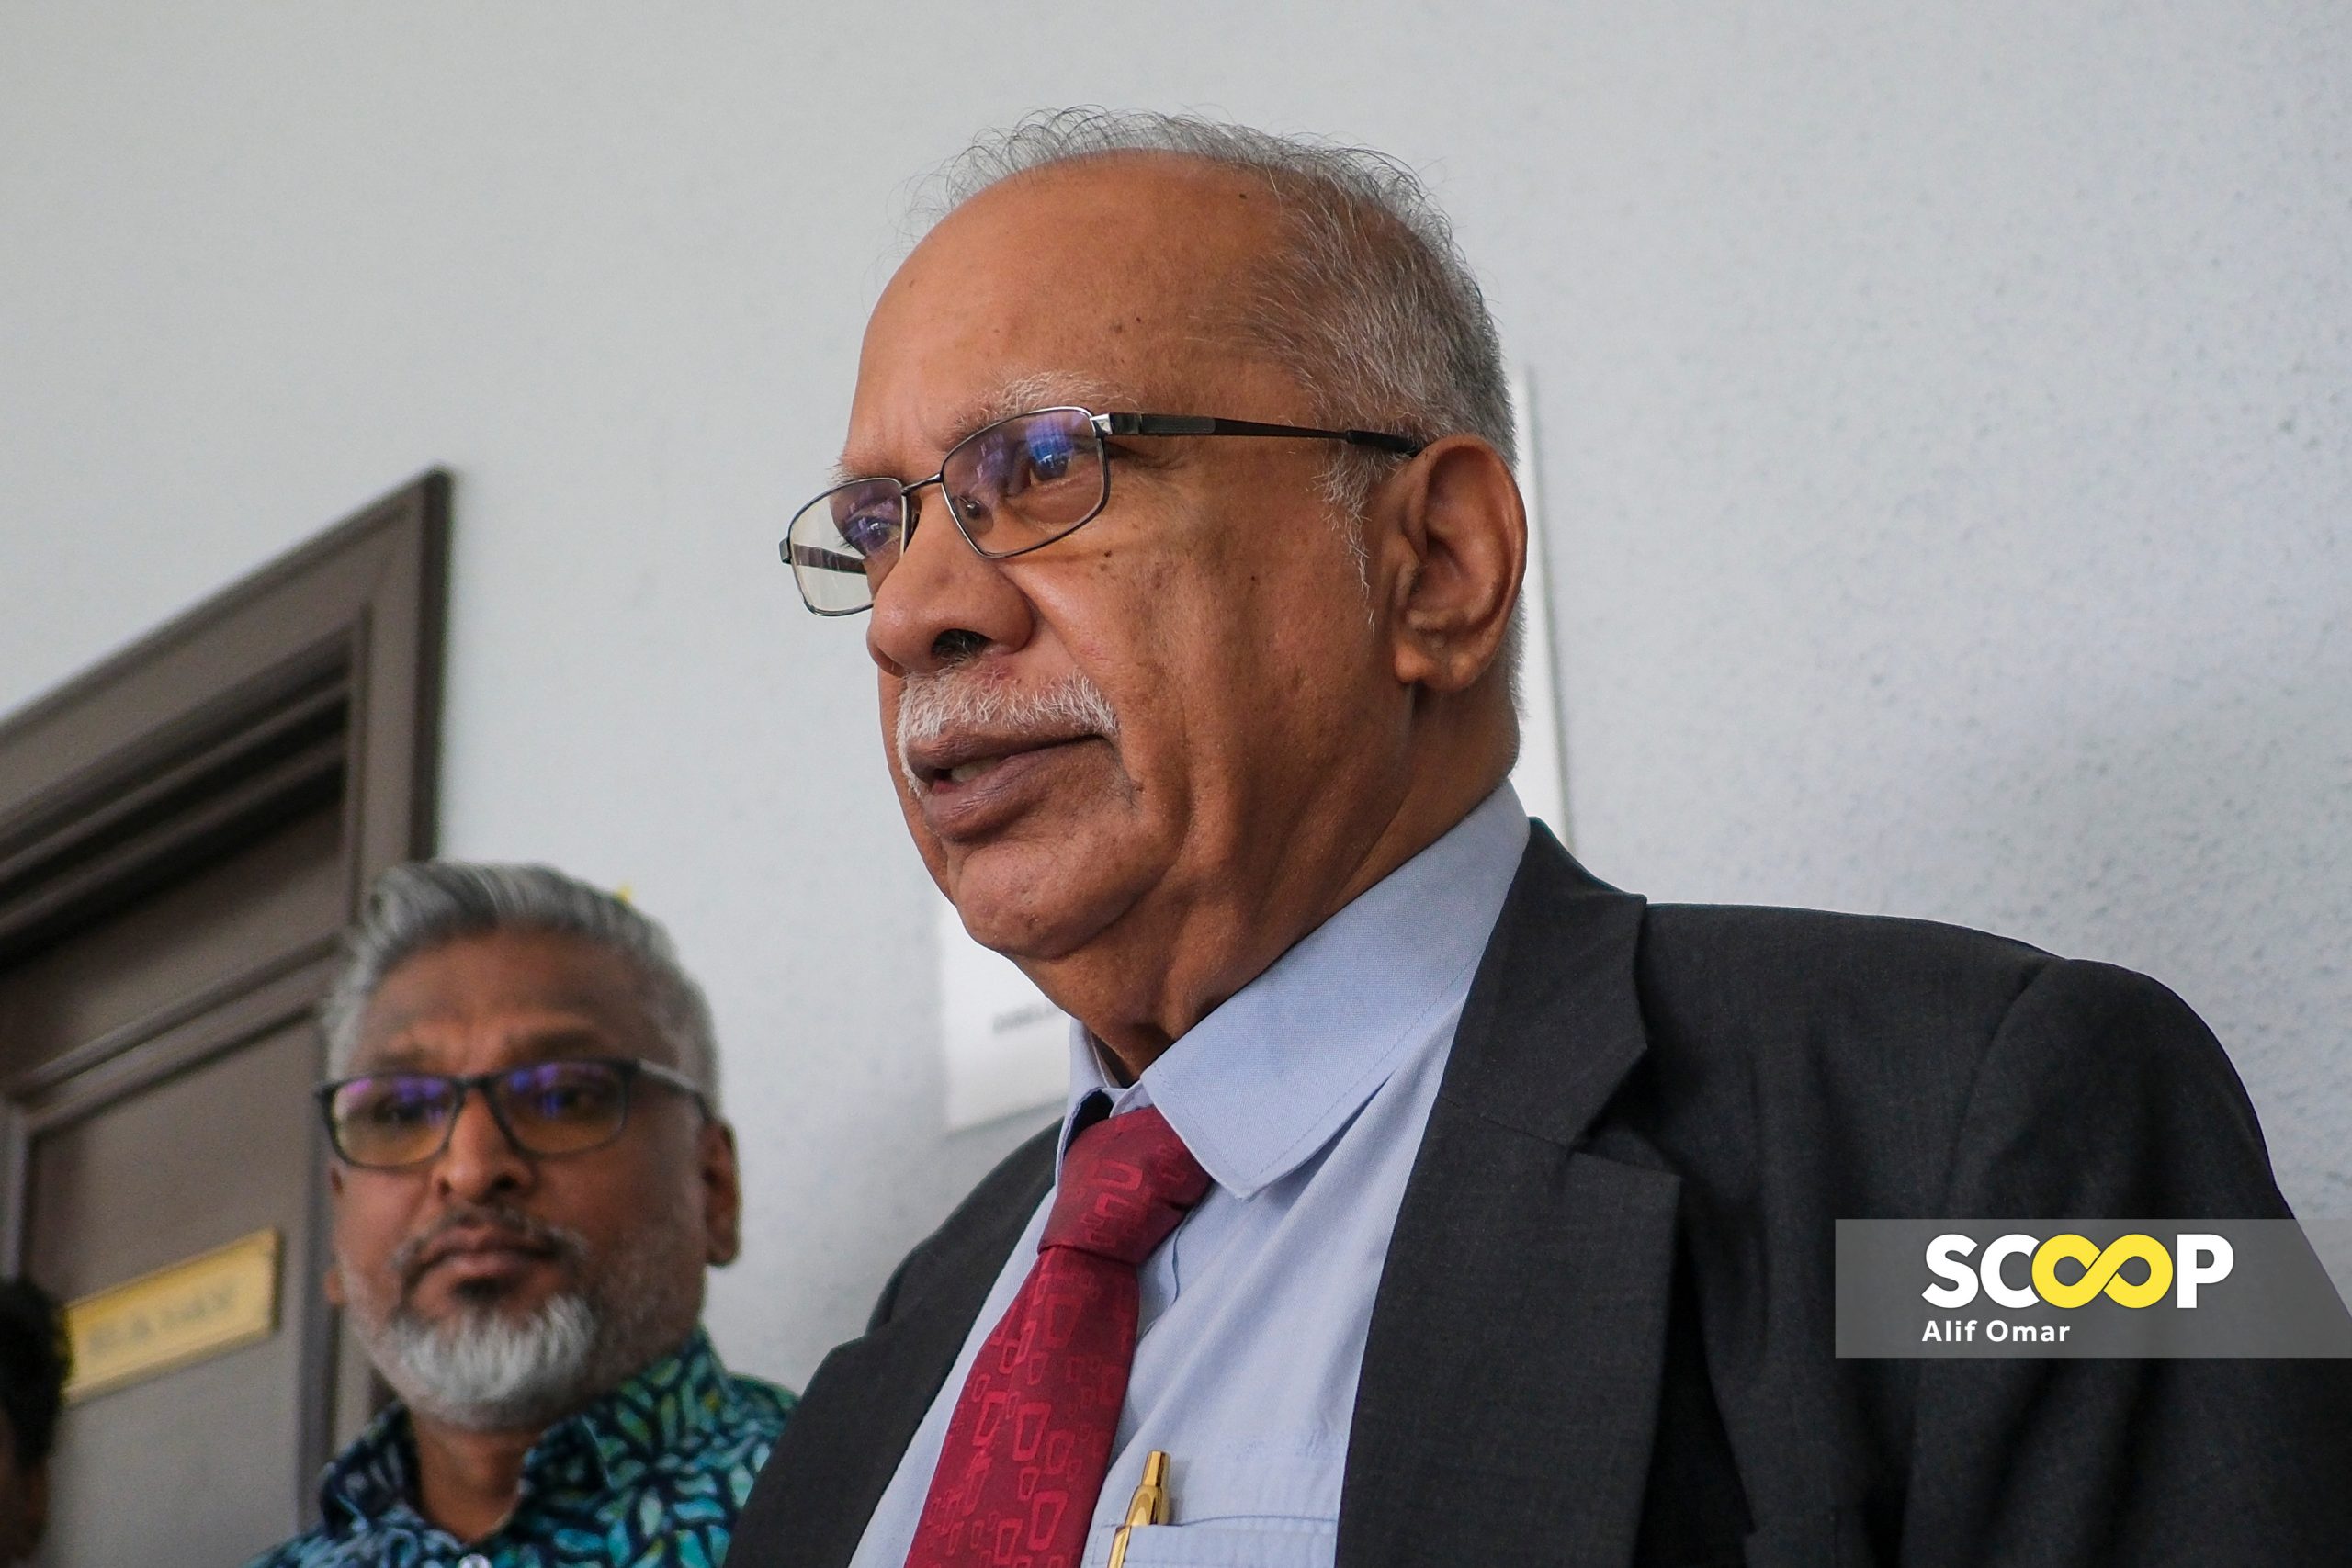 'I'm not driven by revenge, but the need to expose PH's fakeness': Ramasamy